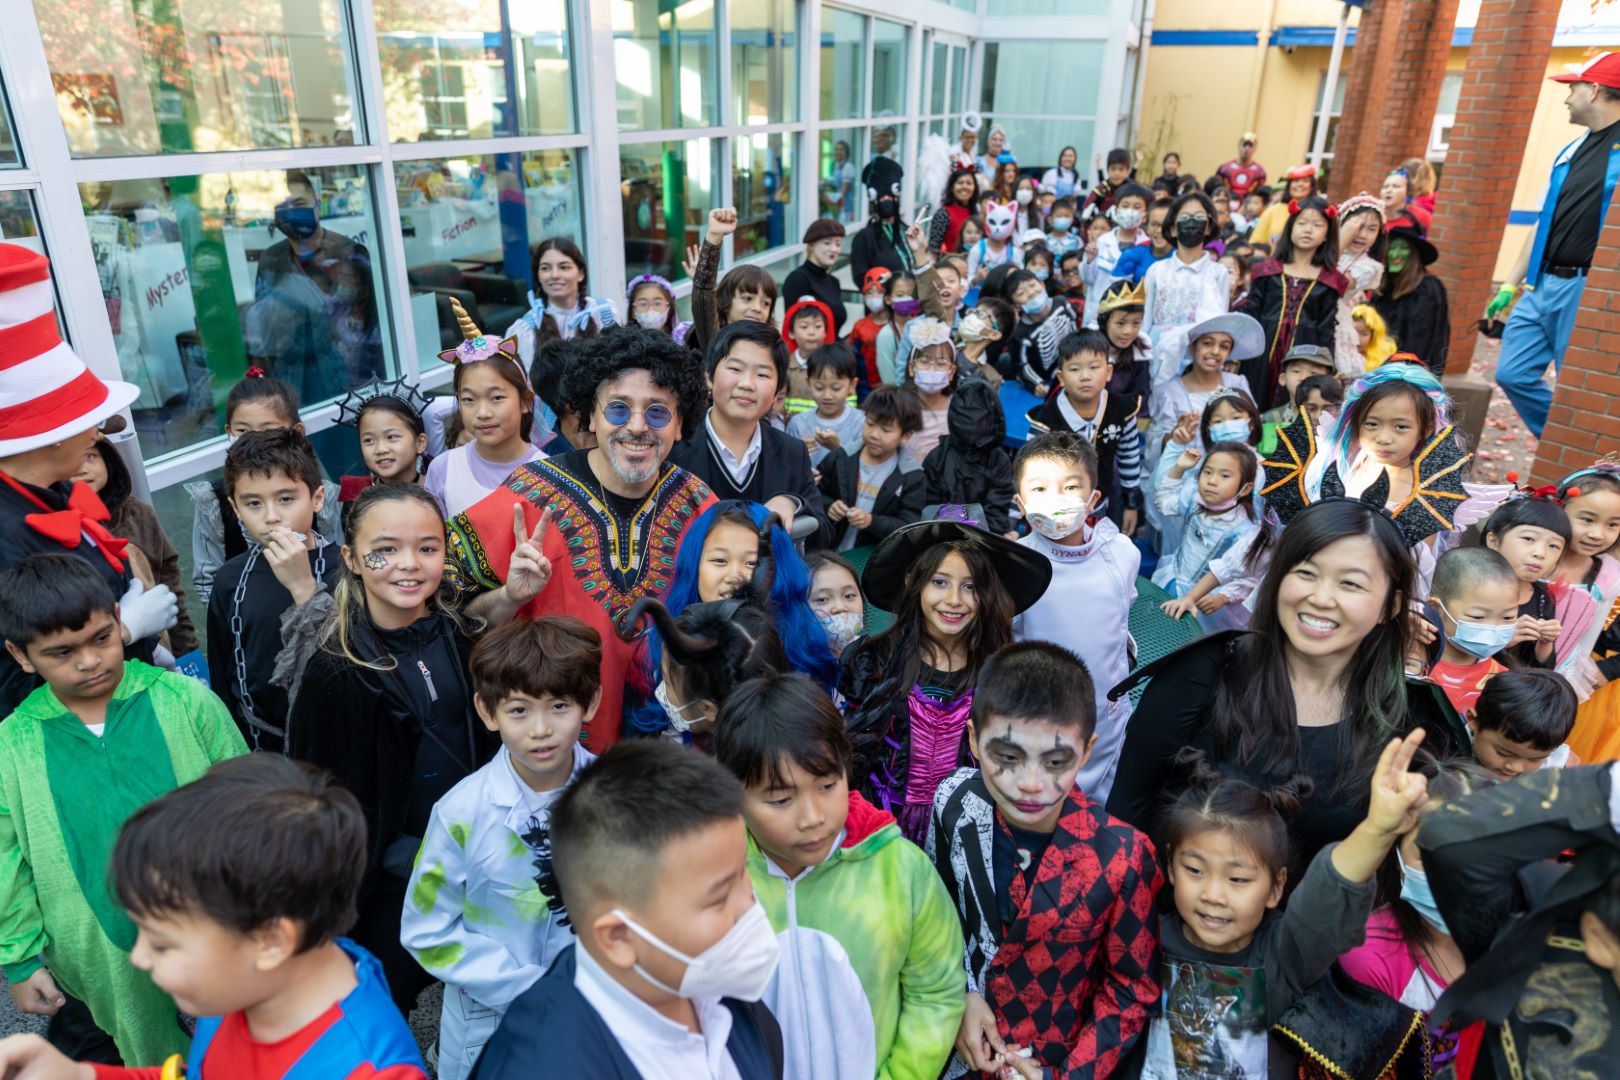 Throwback to our annual costume parade and school wide Halloween celebration!